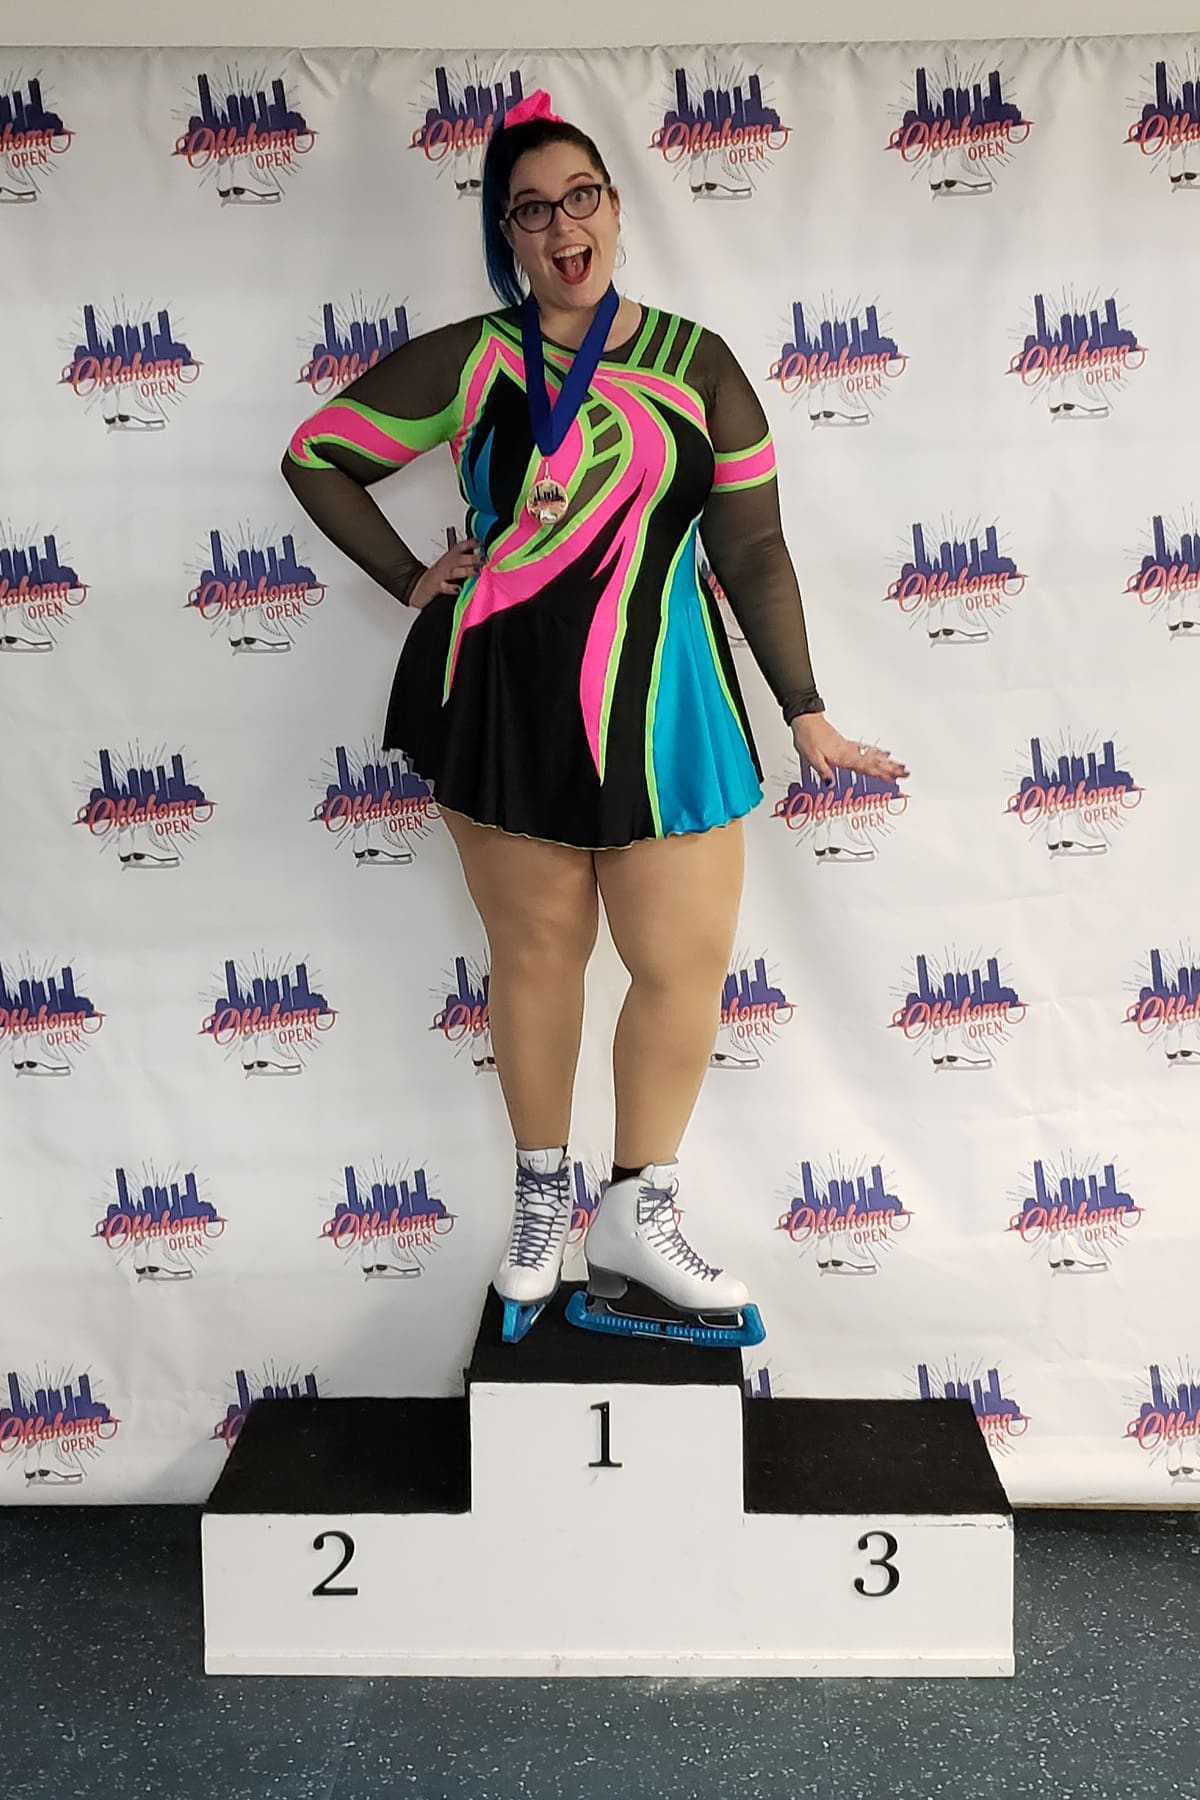 A gorgeous dark haired figure skater in a black, hot pink, lime green, and sky blue 80s themed figure skating dress. She stands alone on the top of a podium, smiling brightly.